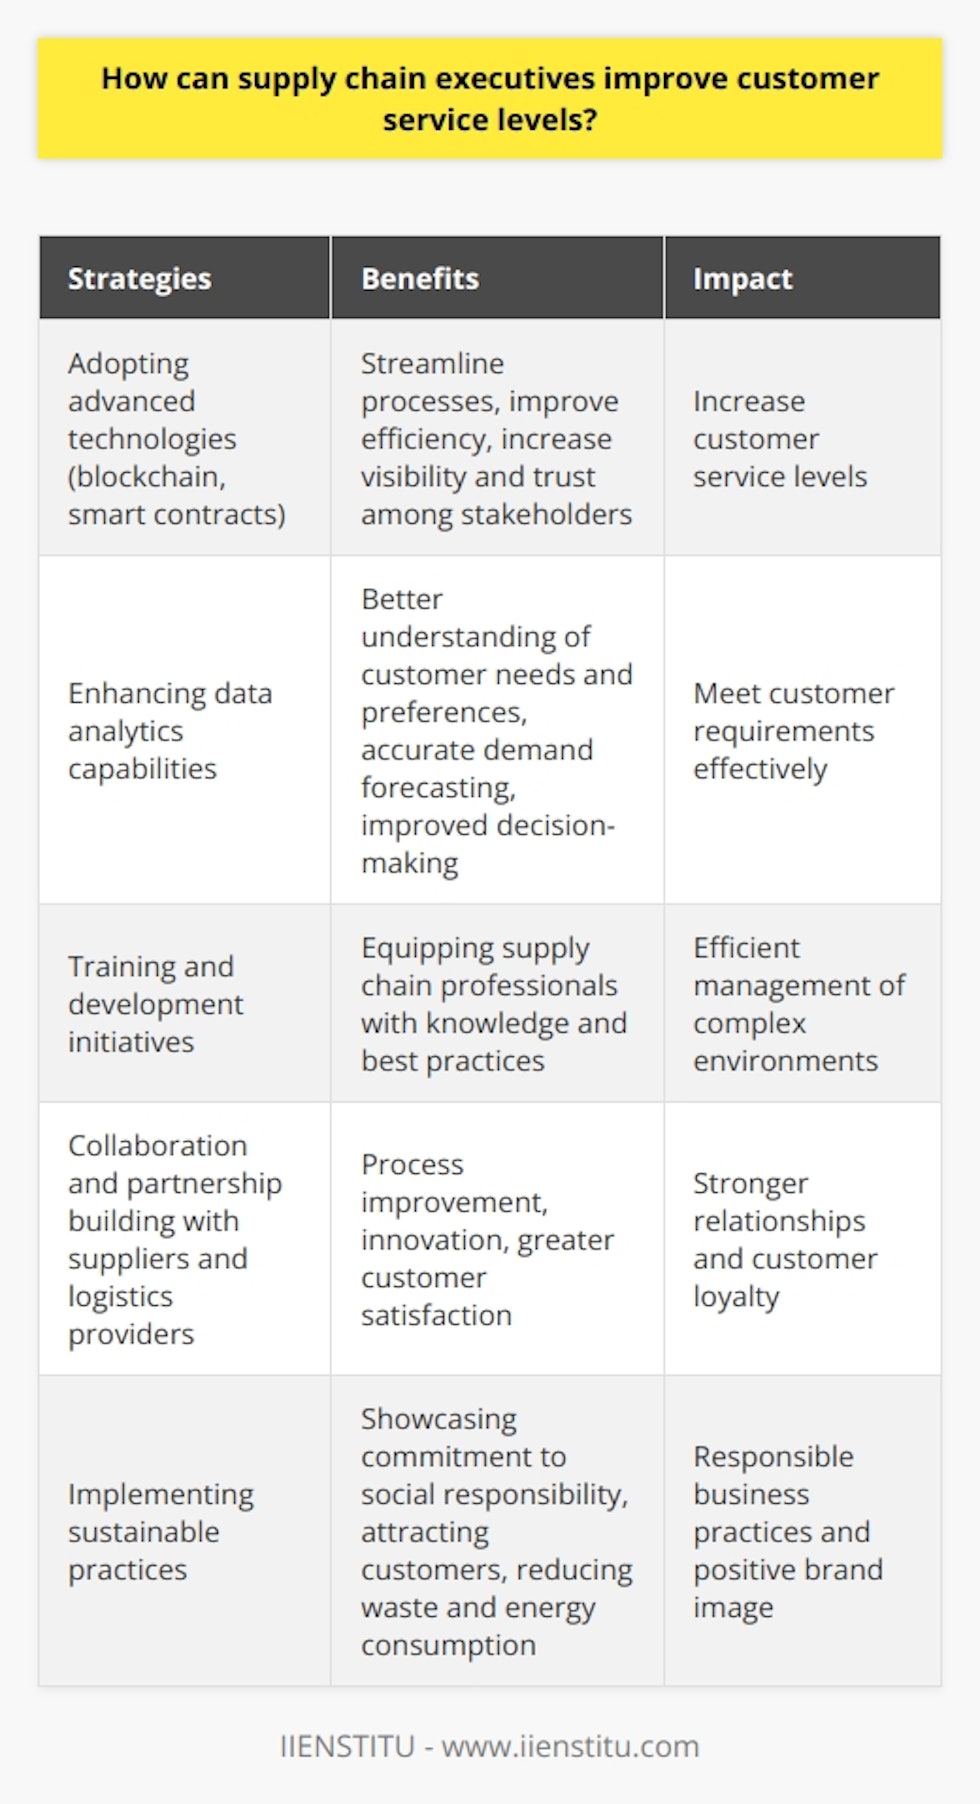 Supply chain executives play a critical role in ensuring high customer service levels. By adopting advanced technologies such as blockchain and smart contracts, they can streamline processes and improve efficiency, ultimately increasing visibility and trust among stakeholders. Enhancing data analytics capabilities allows executives to leverage data from various sources to better understand customer needs and preferences, enabling more accurate demand forecasting and decision-making. Training and development initiatives equip supply chain professionals with the knowledge and best practices essential for managing complex environments. Collaboration and partnership building with suppliers and logistics providers foster process improvement and innovation, leading to greater customer satisfaction. Implementing sustainable practices, such as reducing waste and minimizing energy consumption, showcases a commitment to social responsibility and attracts customers who value responsible business practices. Overall, adopting these strategies enables organizations to anticipate and respond to customer needs effectively, fostering stronger relationships and driving long-term success.